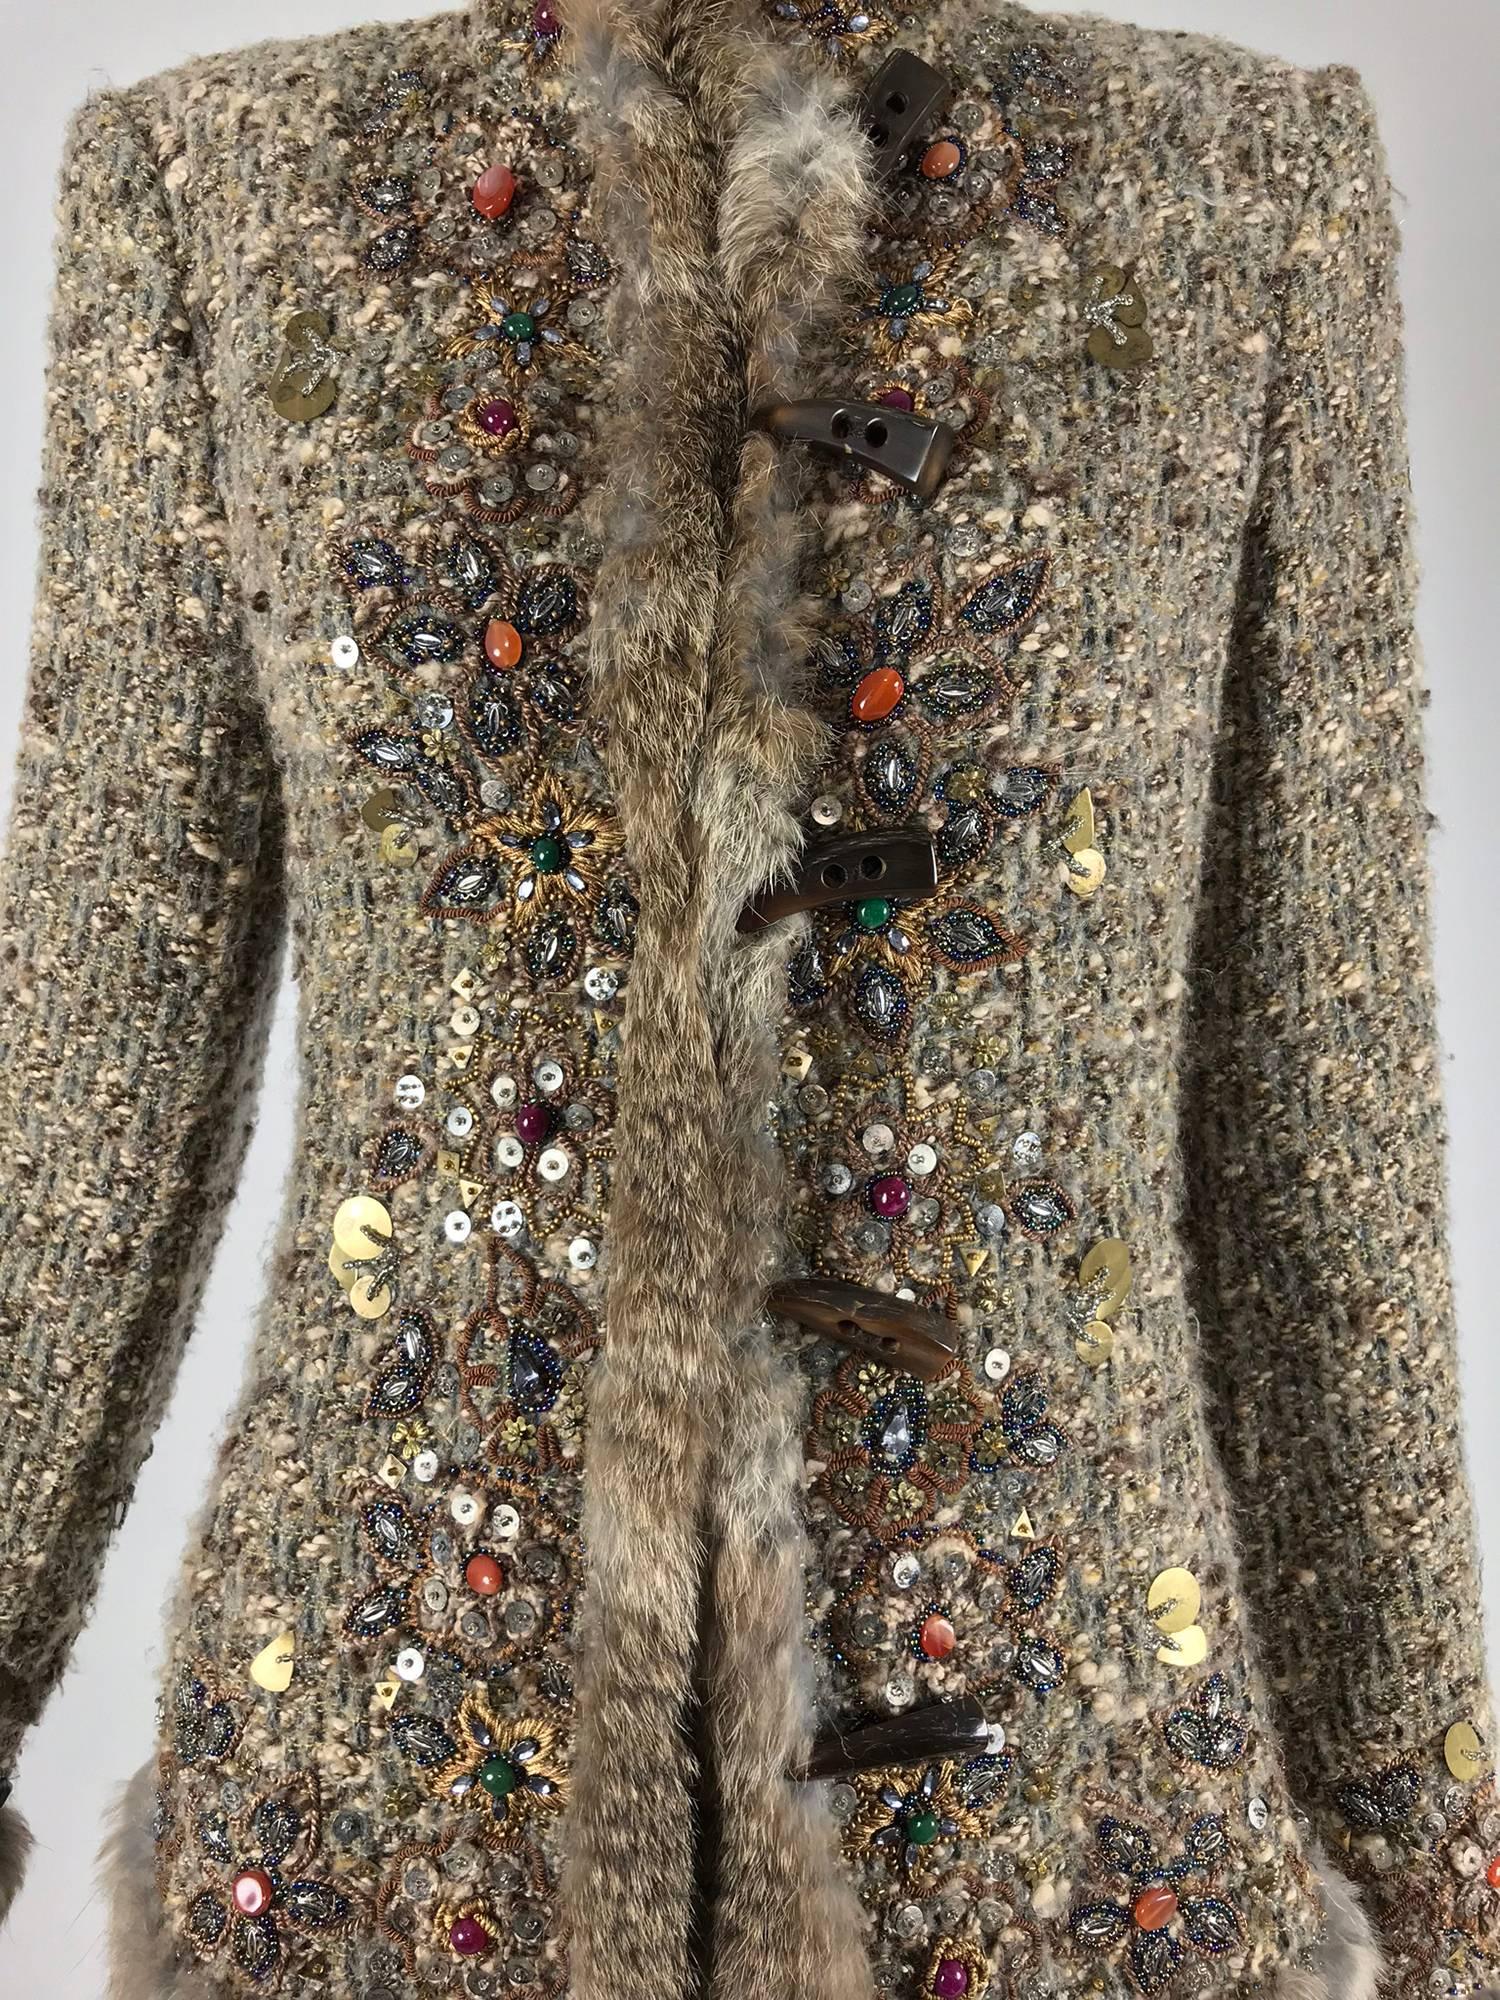 Oscar de la Renta jewel and fur trim soft tweed knit skirt set...Beautiful Jacket and skirt set in rich warm tones of brown, the fabric is a soft knit...The jacket and the skirt are trimmed with coloured jewels, metal sequins of different shapes and